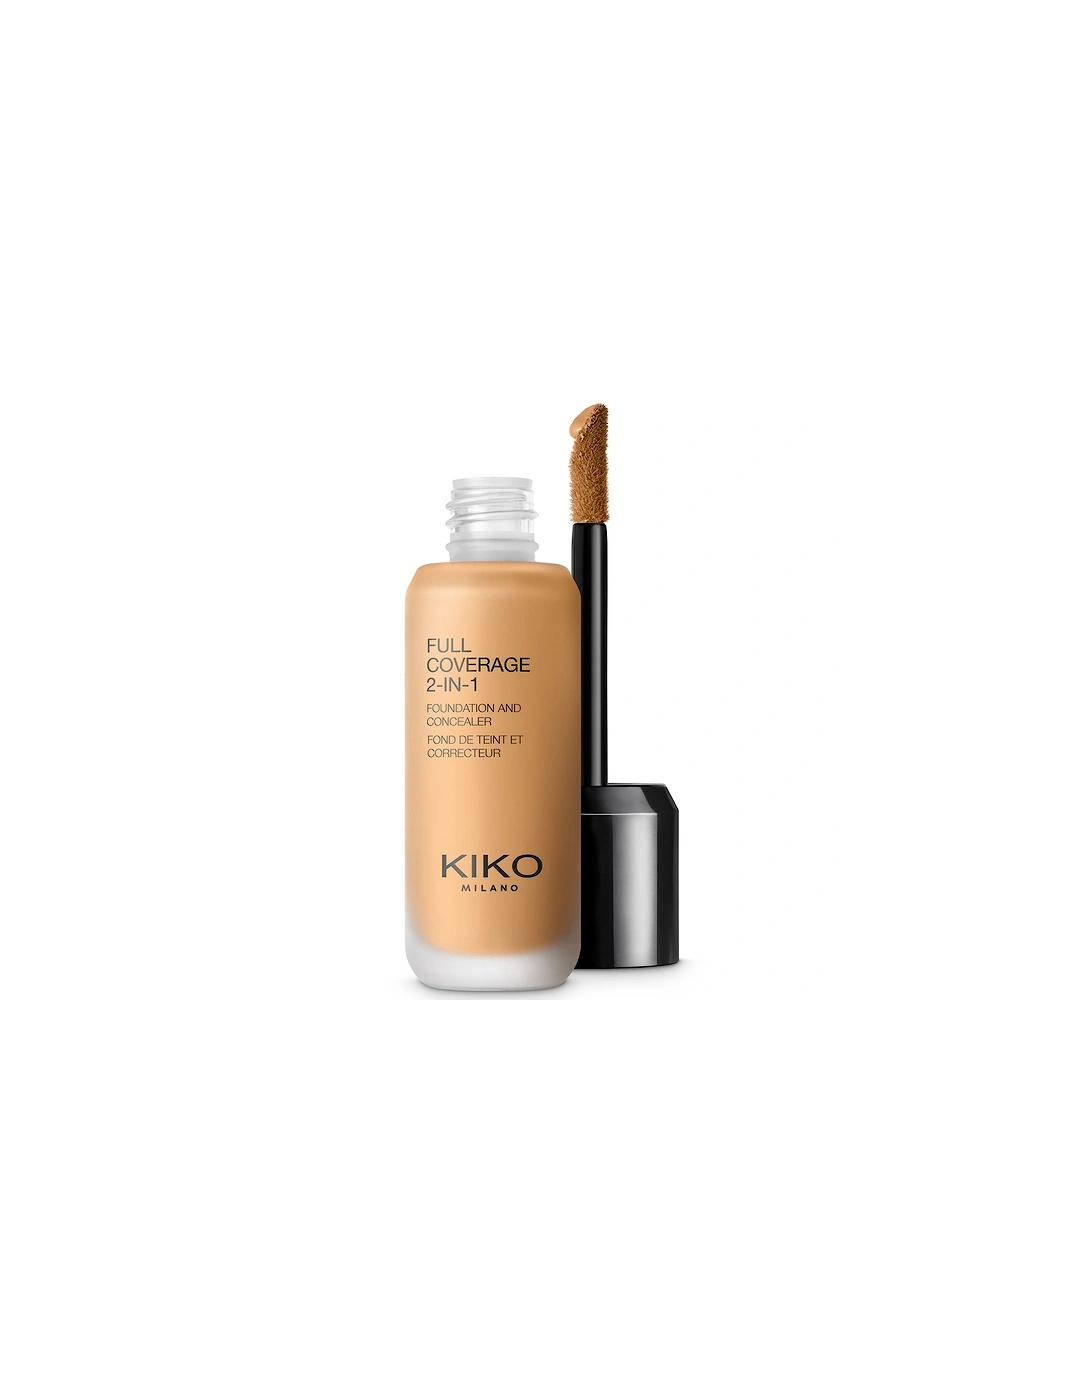 Full Coverage 2-in-1 Foundation and Concealer - 65 Gold, 2 of 1